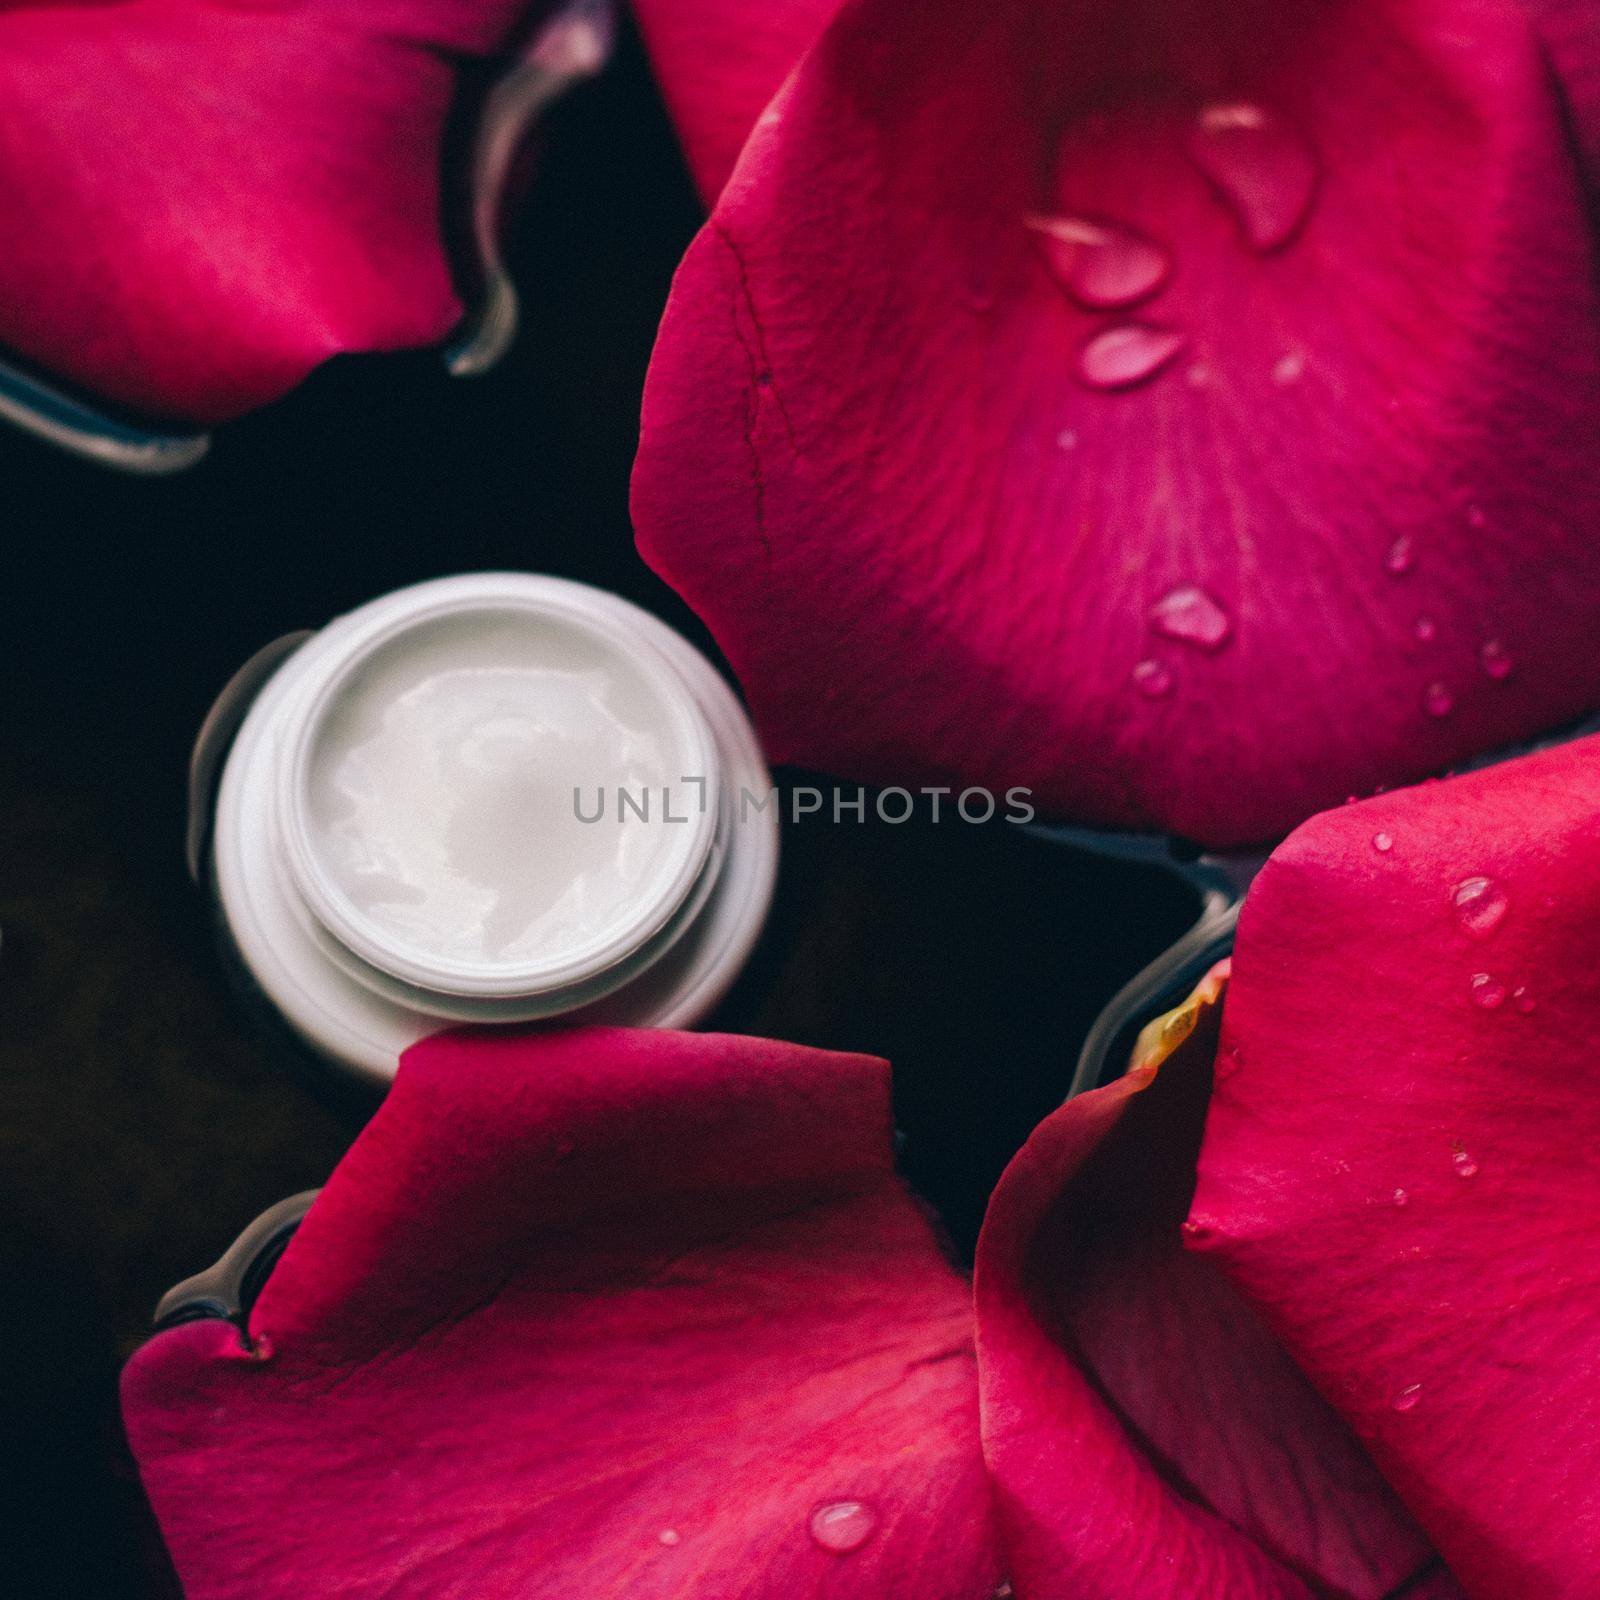 beauty cream jar and flower petals - cosmetics with flowers styled concept by Anneleven